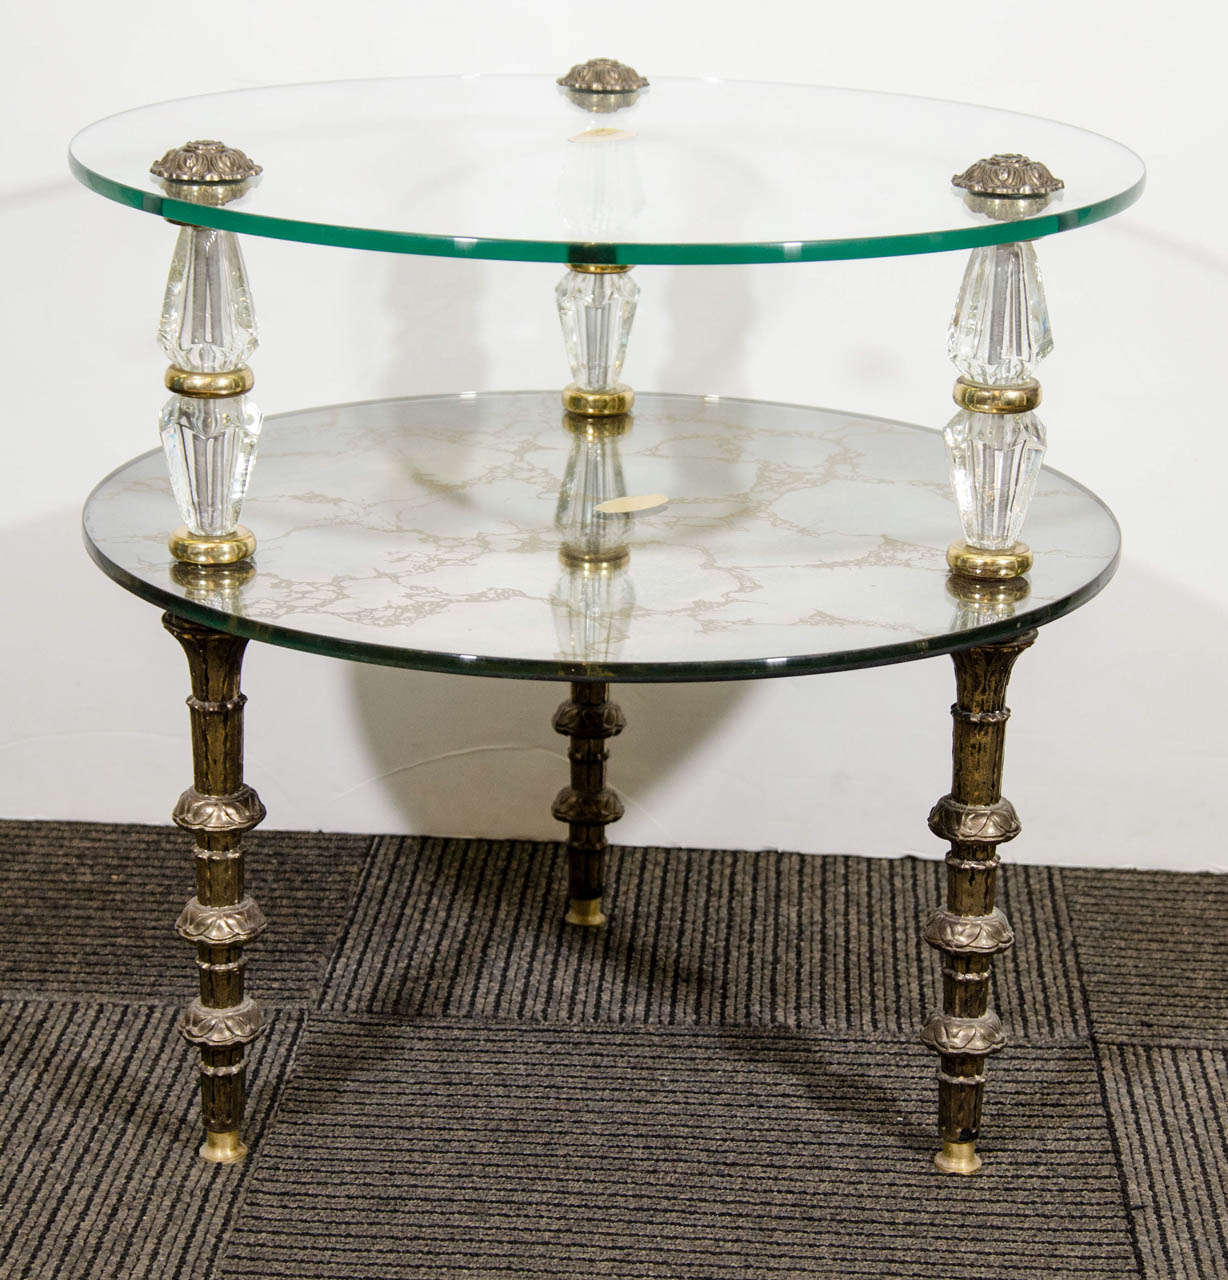 A vintage pair of two-tier side and end tables, produced in Belgium by Goran Manufacturing Co. Inc, circa 1950's, with two glass and églomisé round tops, supported by beautiful, classically formed legs in brass and faceted glass. Good vintage